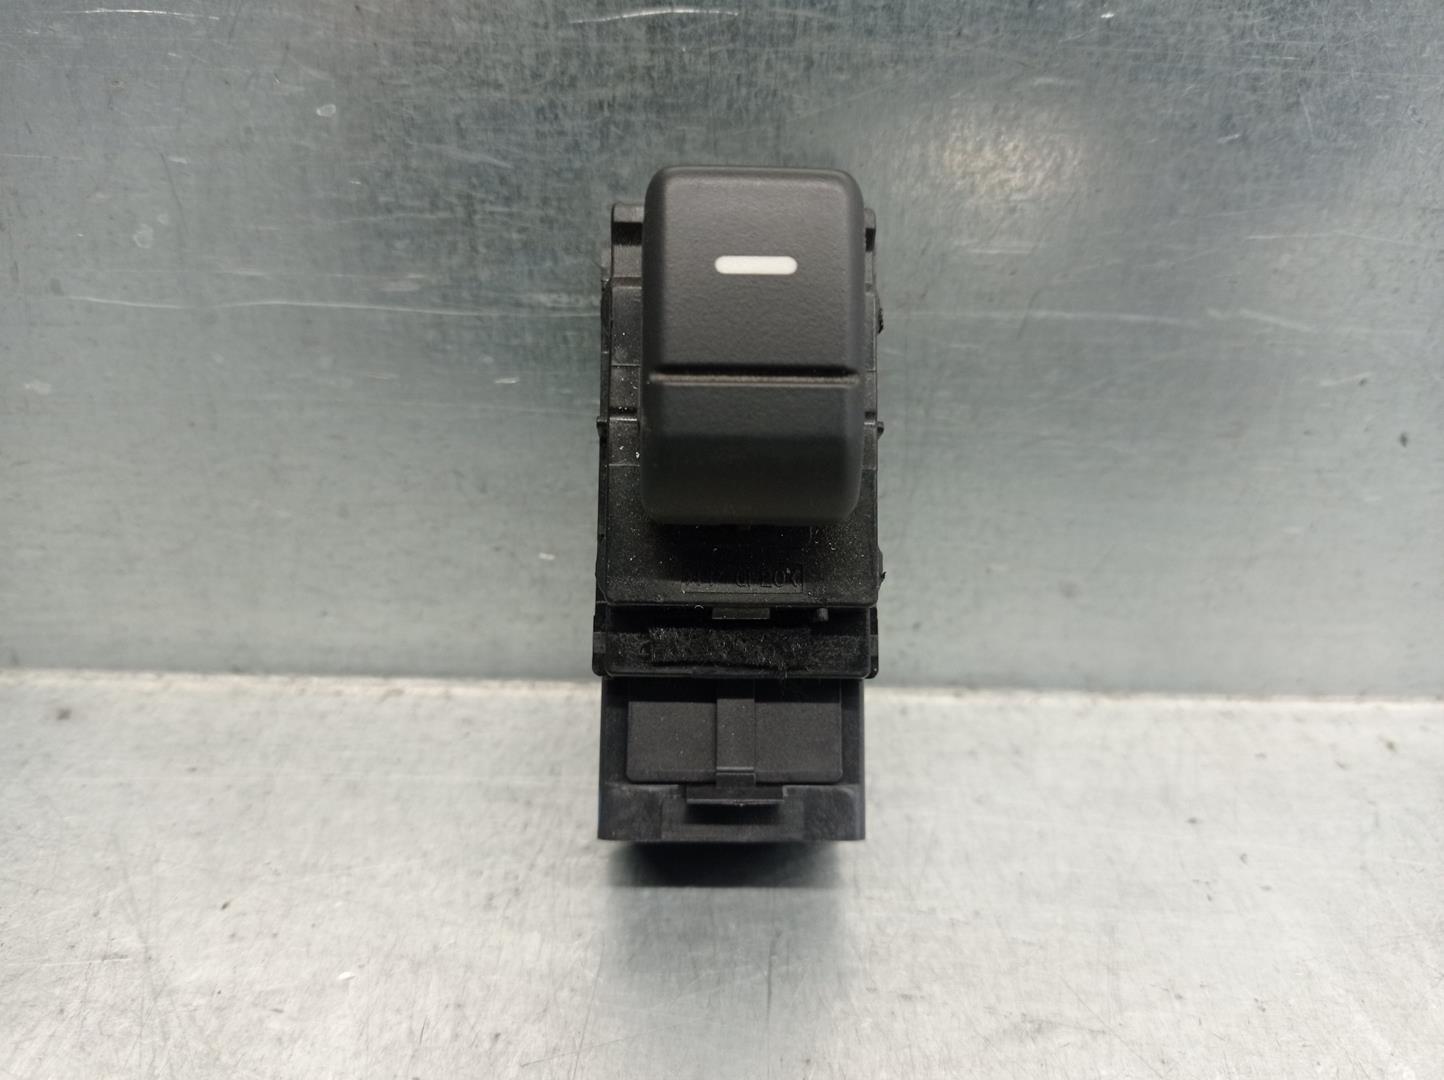 LAND ROVER Discovery 4 generation (2009-2016) Rear Right Door Window Control Switch YUD501070PVJ 19818843